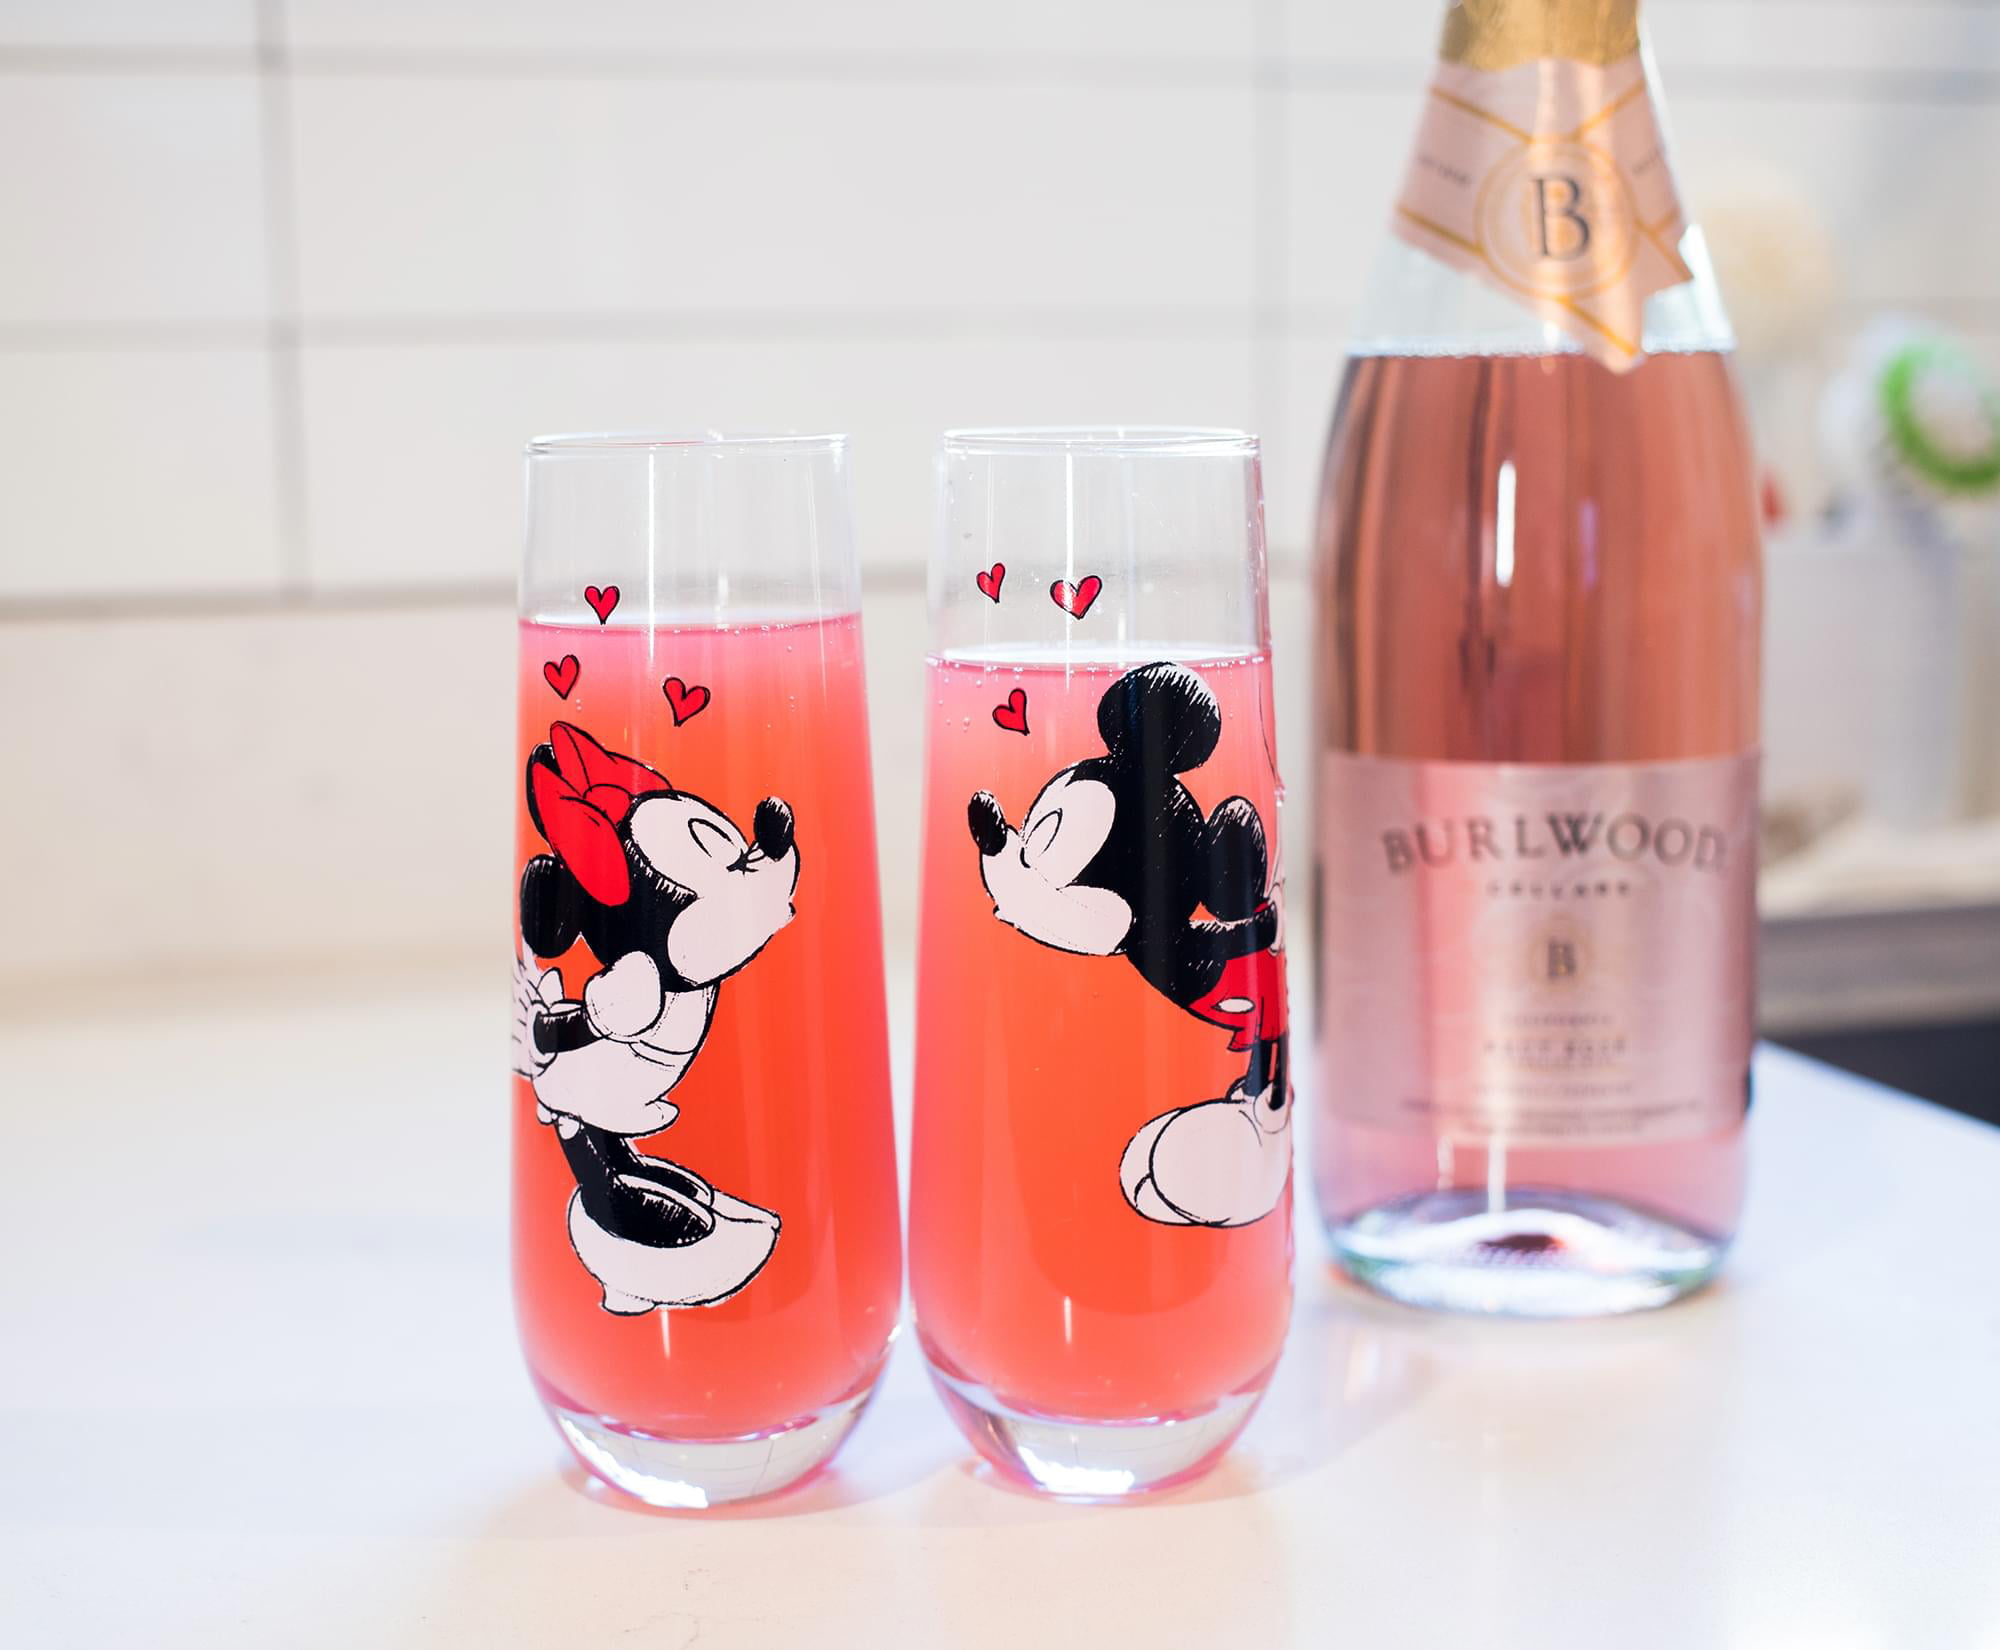 Disney Kissing Mickey and Minnie Mouse Couples Stemless Glasses, Set of 2,  15 ounce